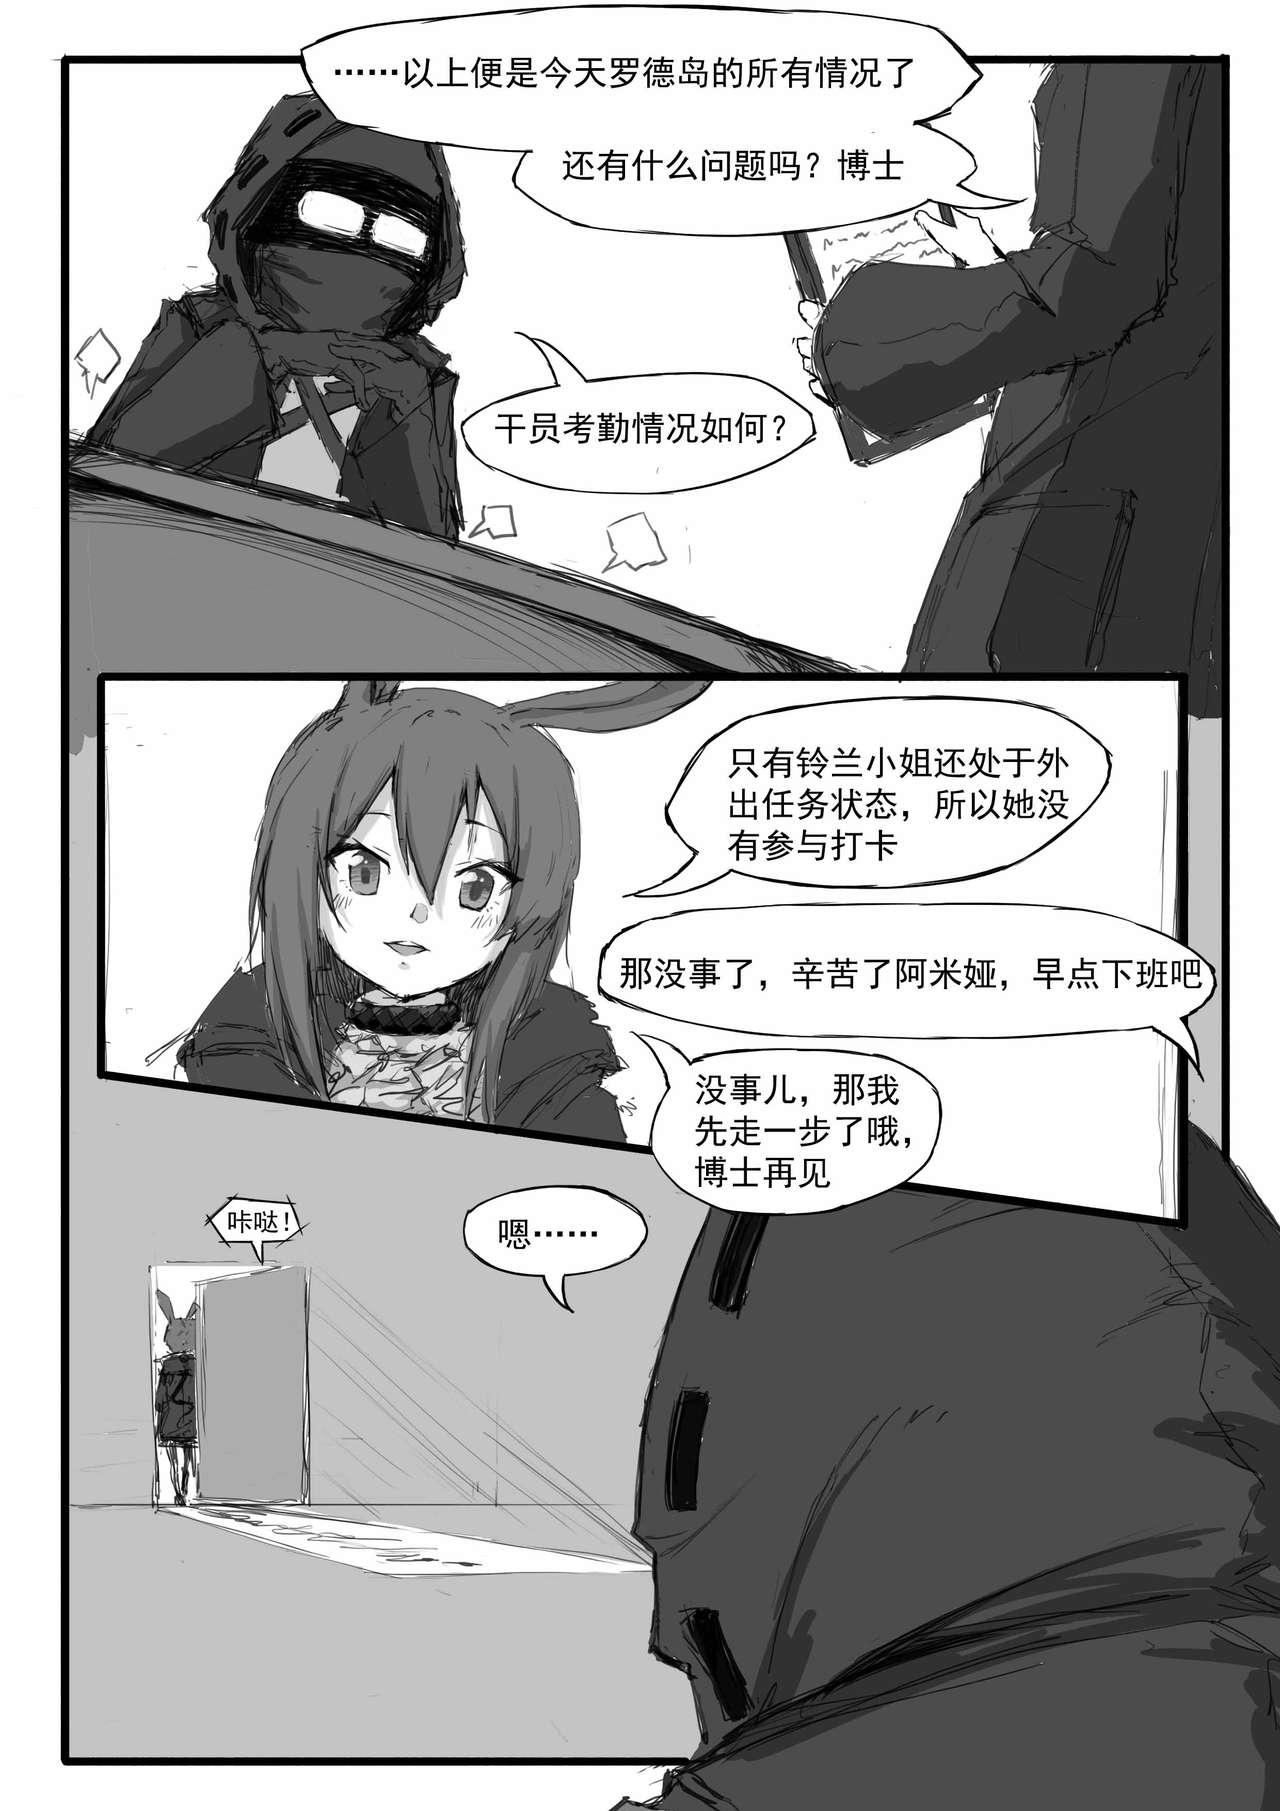 Bush 铃兰的单人任务 - Arknights Baile - Page 2